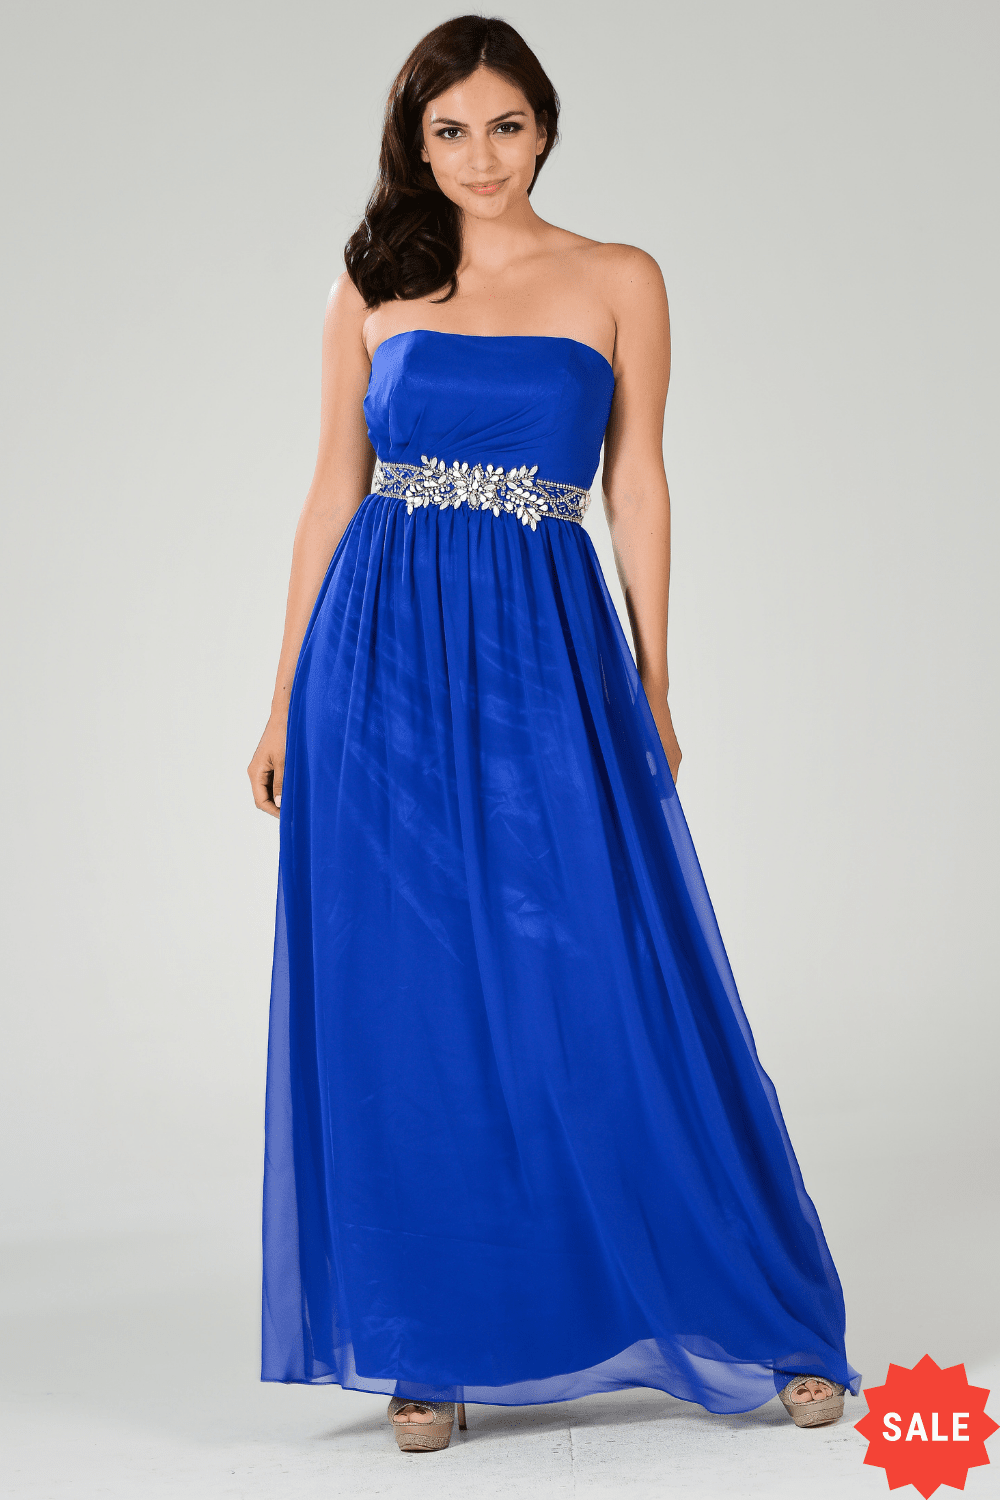 Long Strapless Dress with Embellished Waist by Poly USA 7698